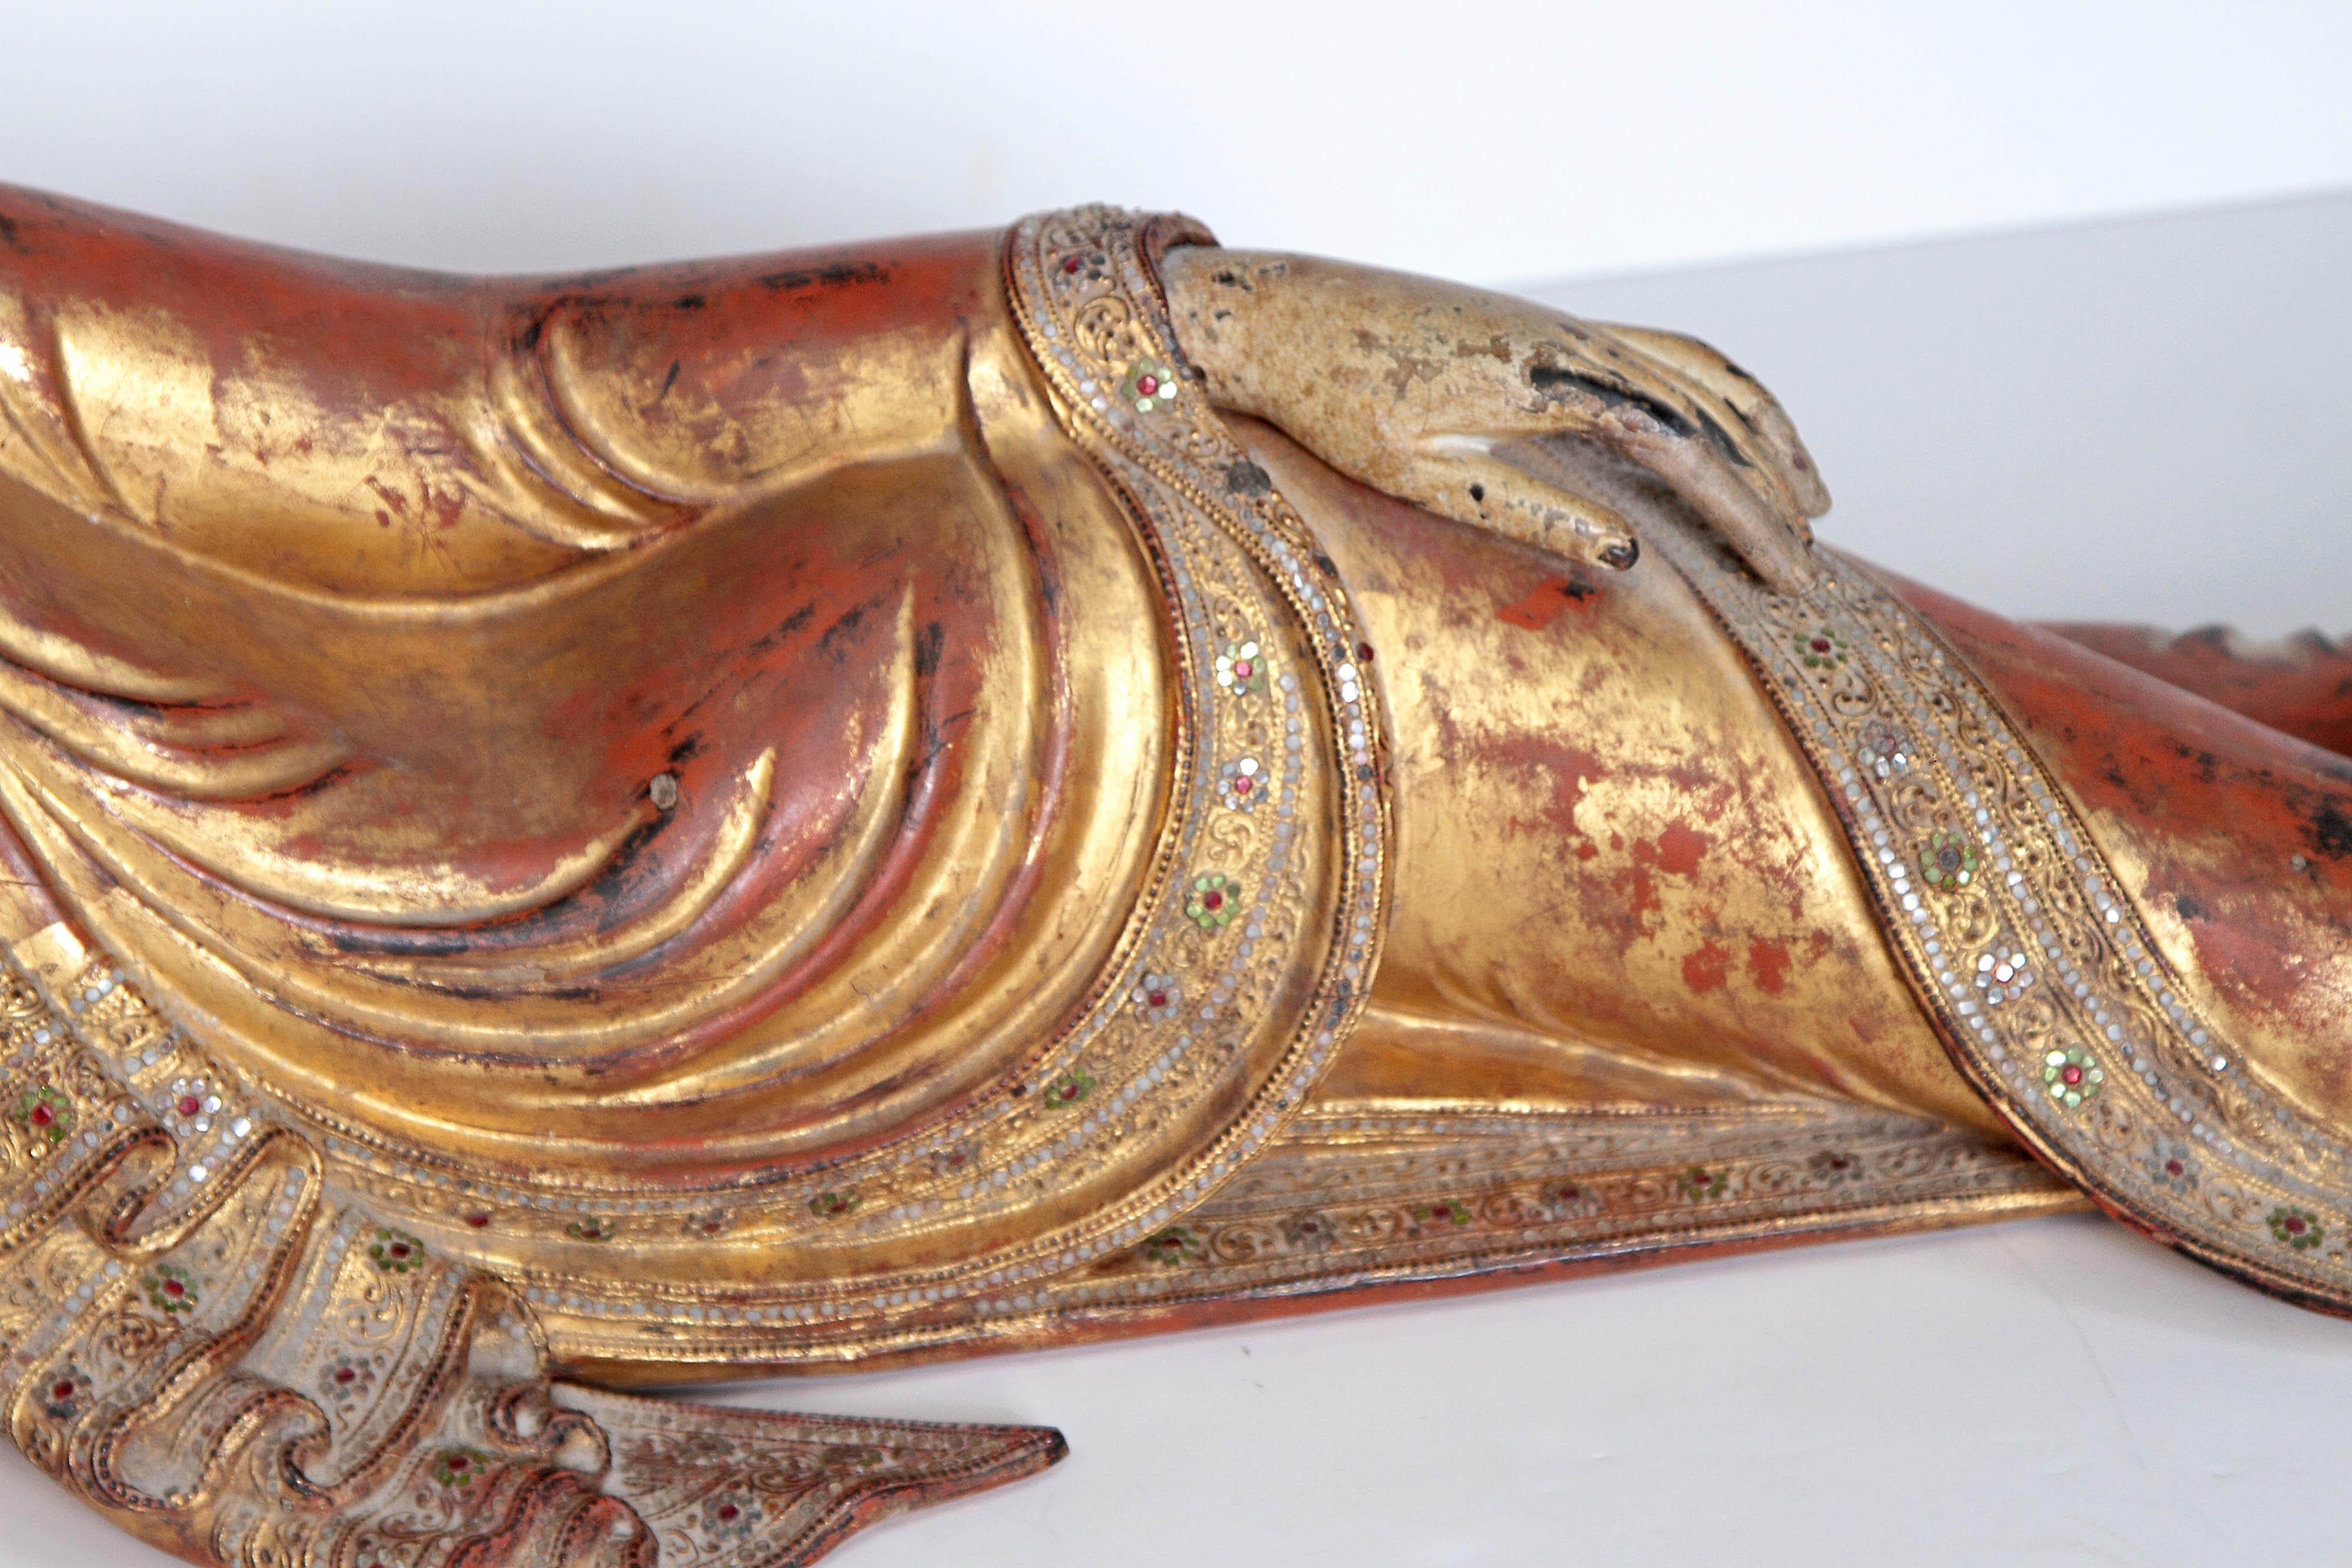 Thai Reclining Buddha or Draped in Golden Robes with a Jeweled Border and Headress